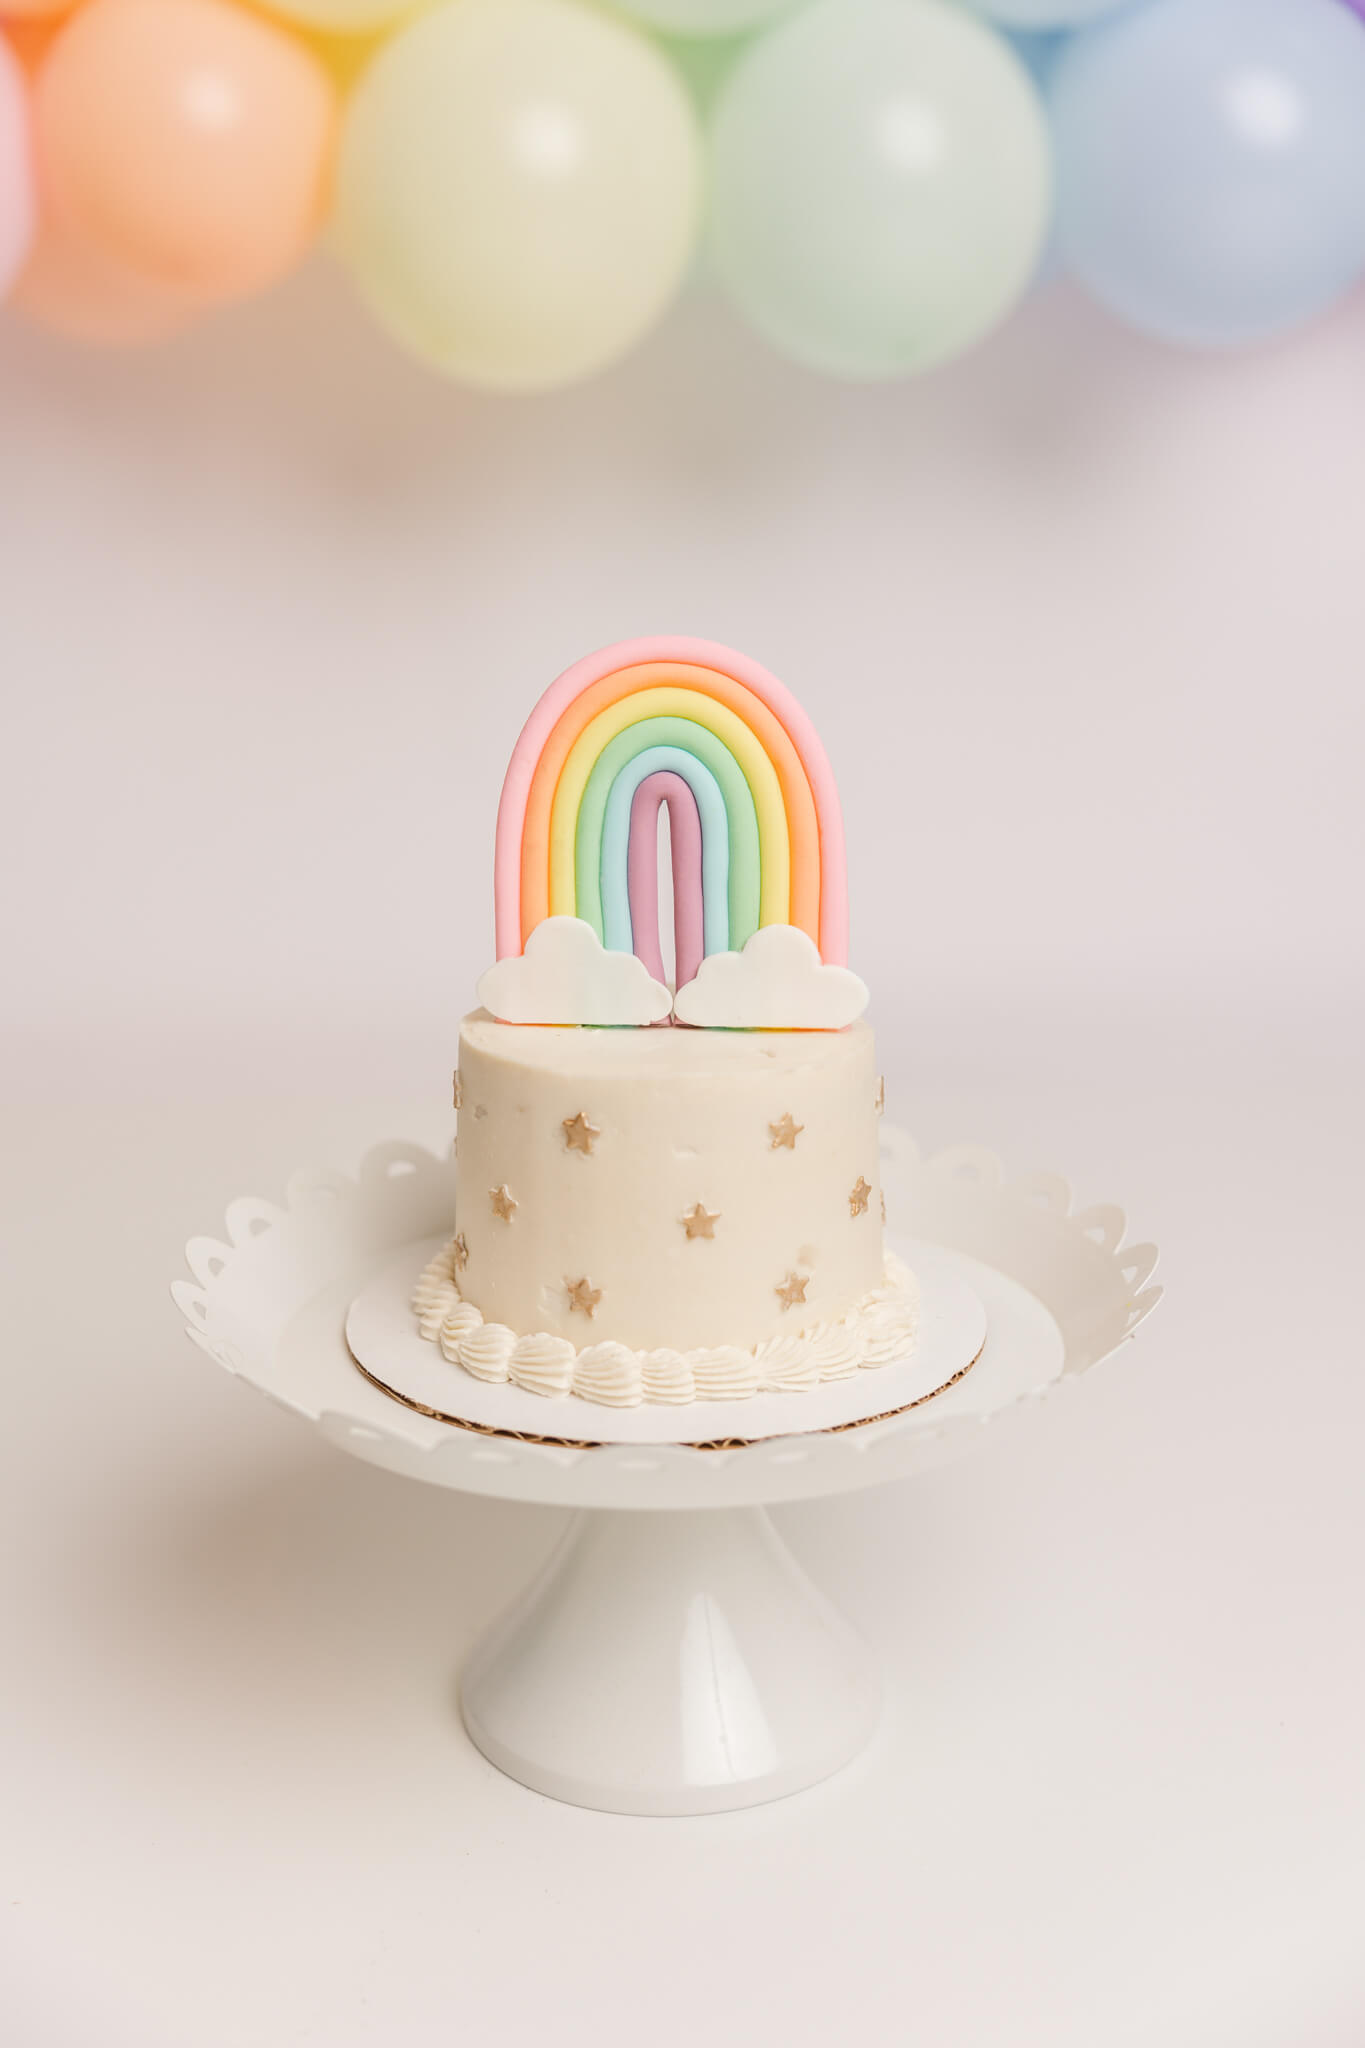 Rainbow topper on cake for 1 year old cake smash session.